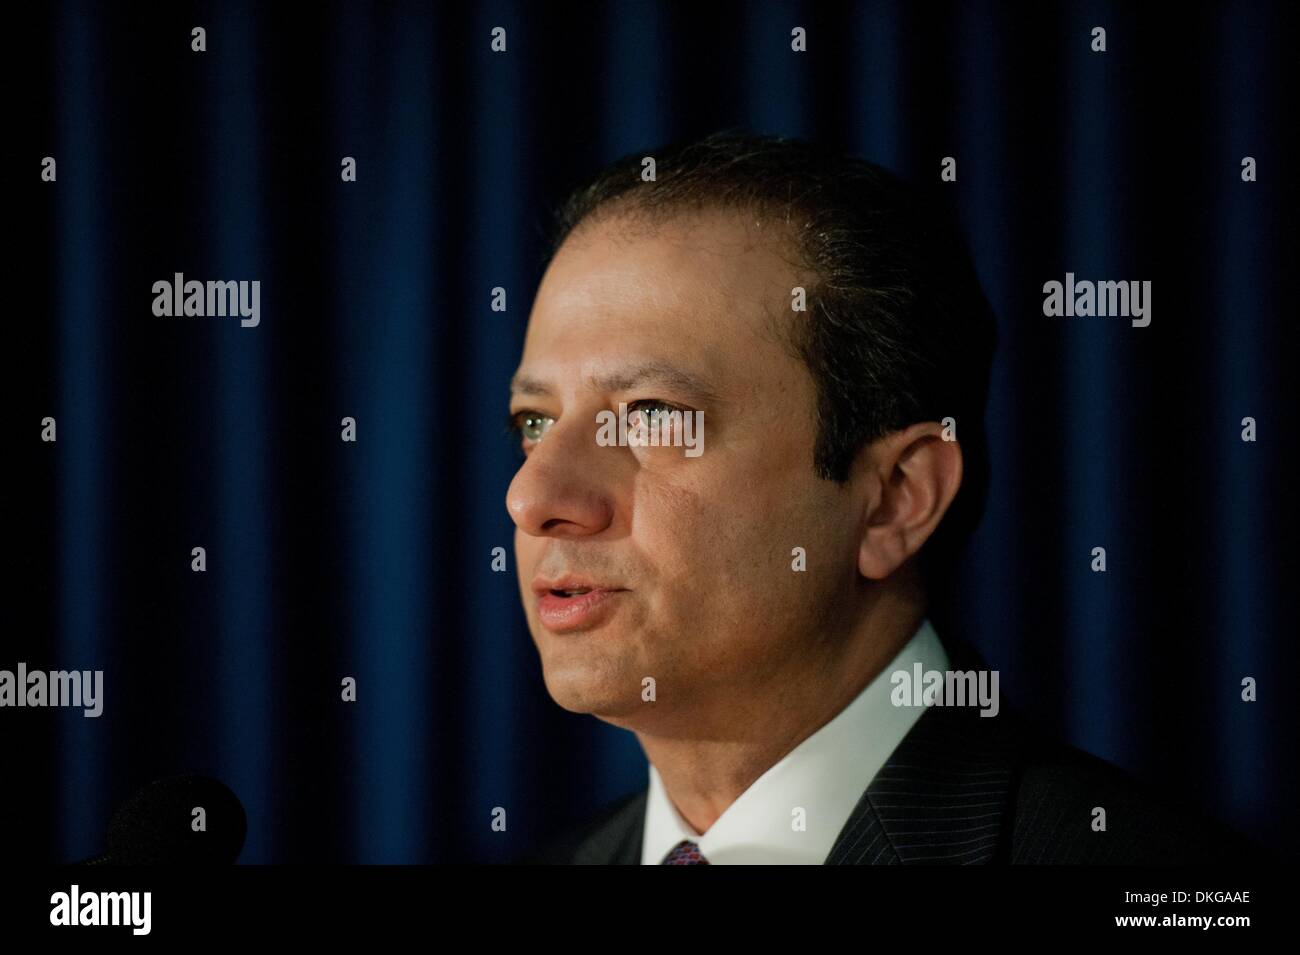 Manhattan, New York, USA. 5th Dec, 2013. PREET BHARARA, the United States Attorney for the Southern District of New York announces charges against 49 defendants for participating in a widespread nine-year fraud scheme to illegally obtain nearly half a million dollars in Medicaid benefits, Thursday, December 5, 2013. (One St. Andrew's Plaza, Lobby). Credit:  ZUMA Press, Inc./Alamy Live News Stock Photo